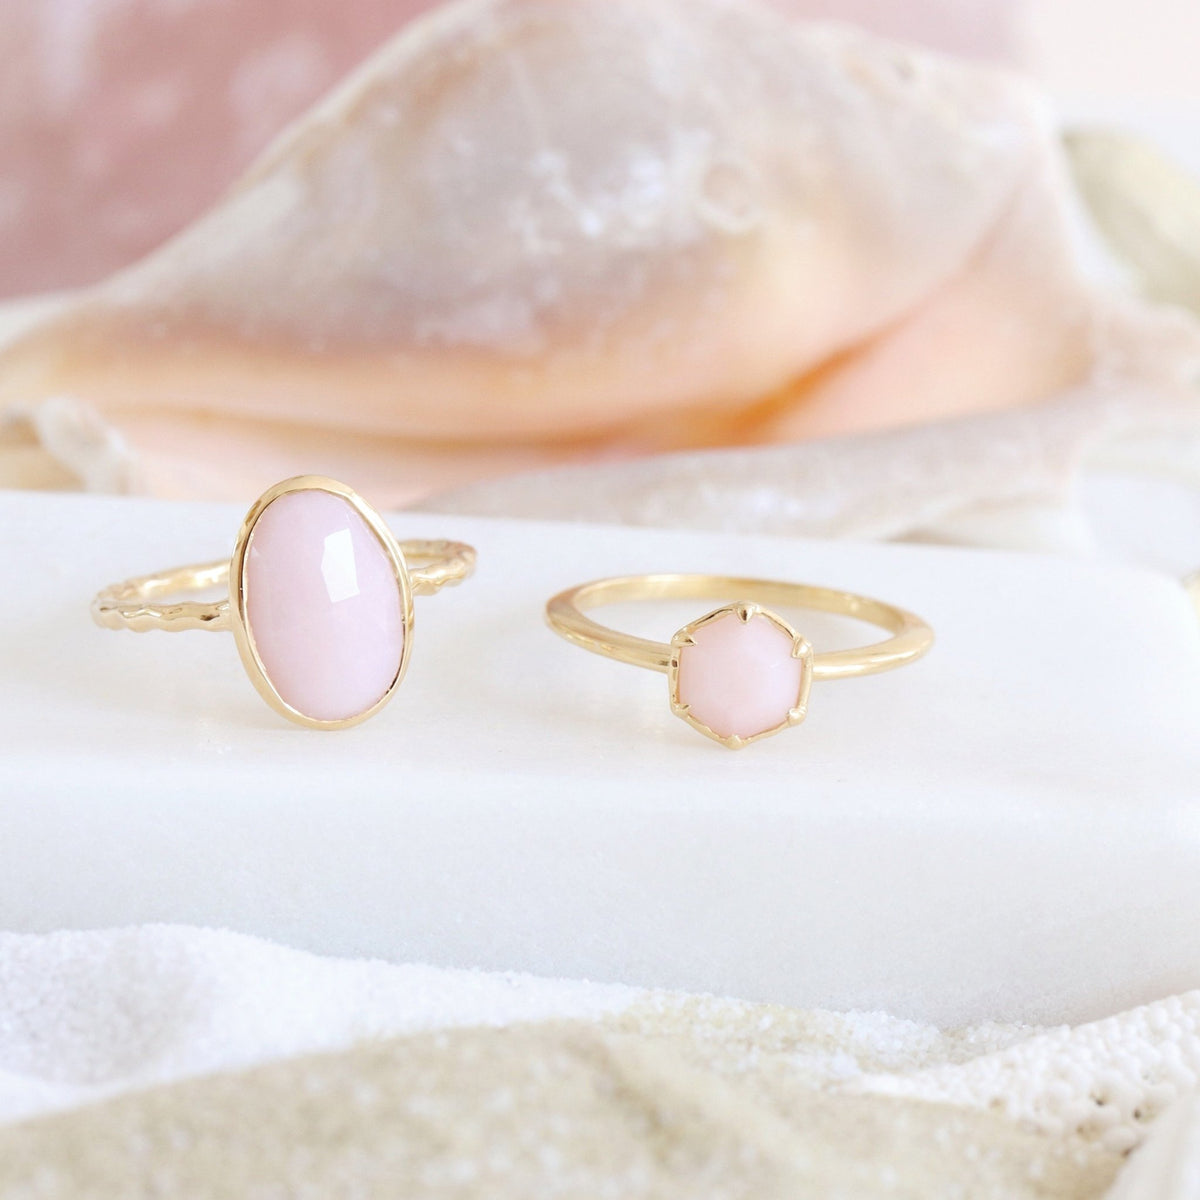 Buy Pink Opal Rings, Made with BIS Hallmarked Gold